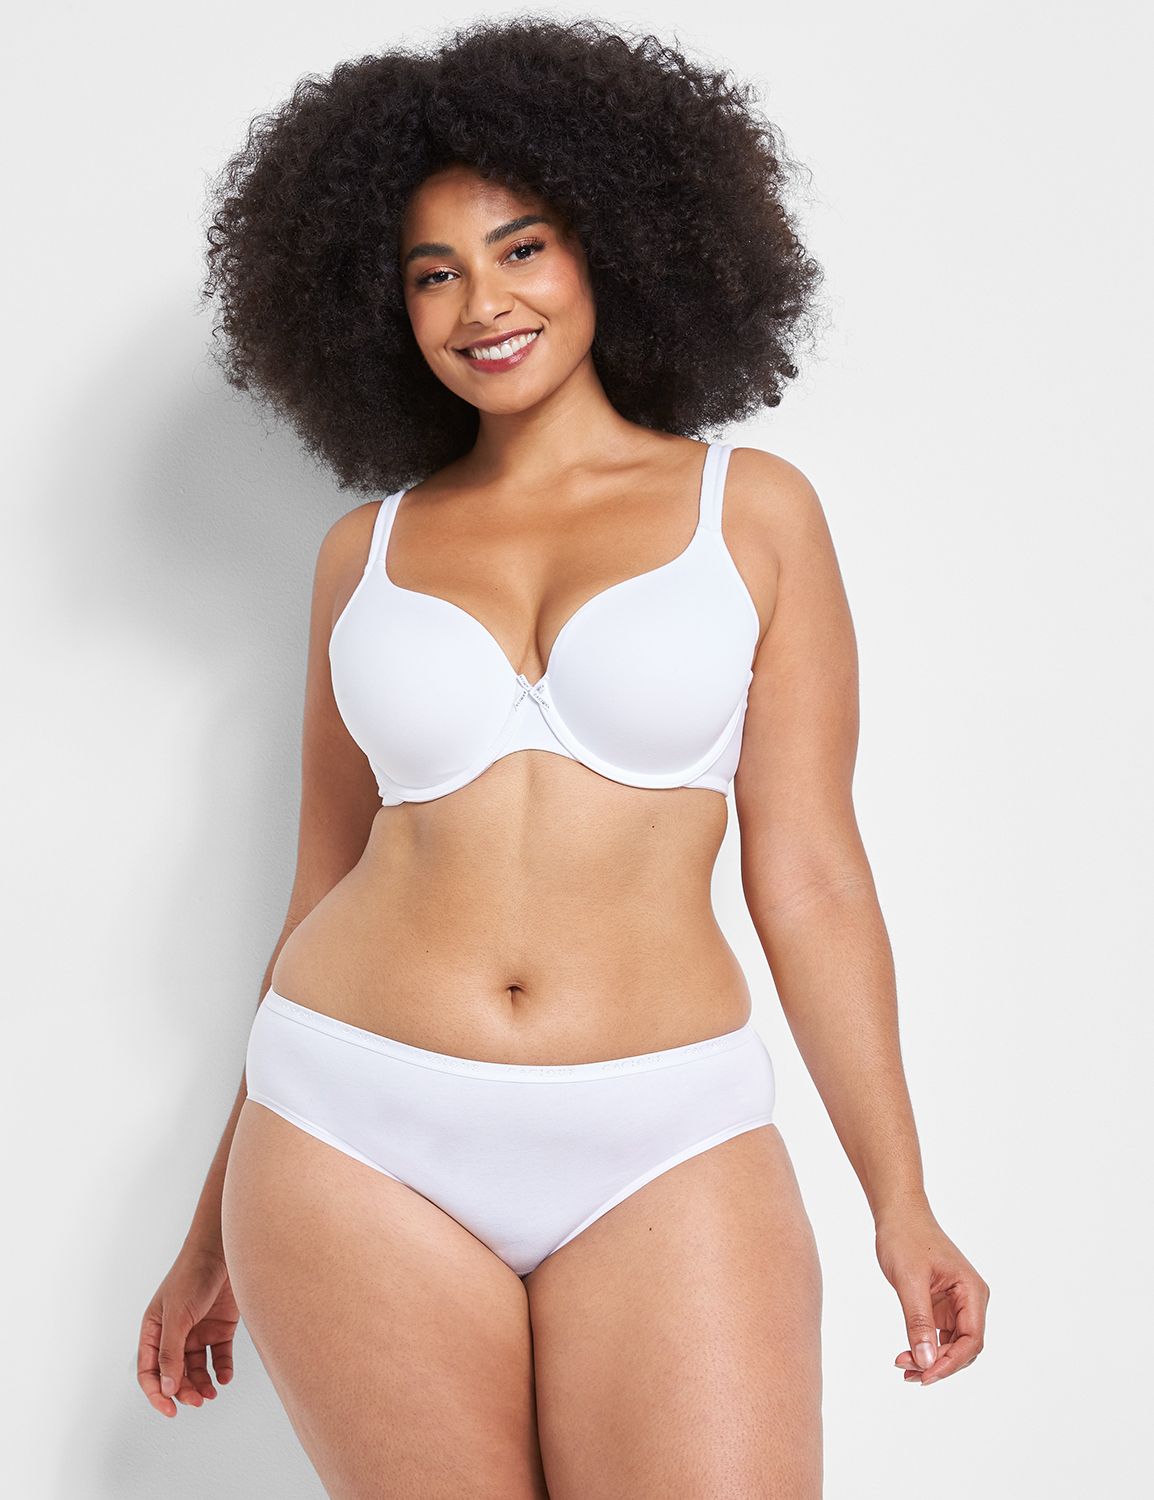 Cacique Bra T shirt Lightly Lined White Cotton Lane Bryant underwire 44DD